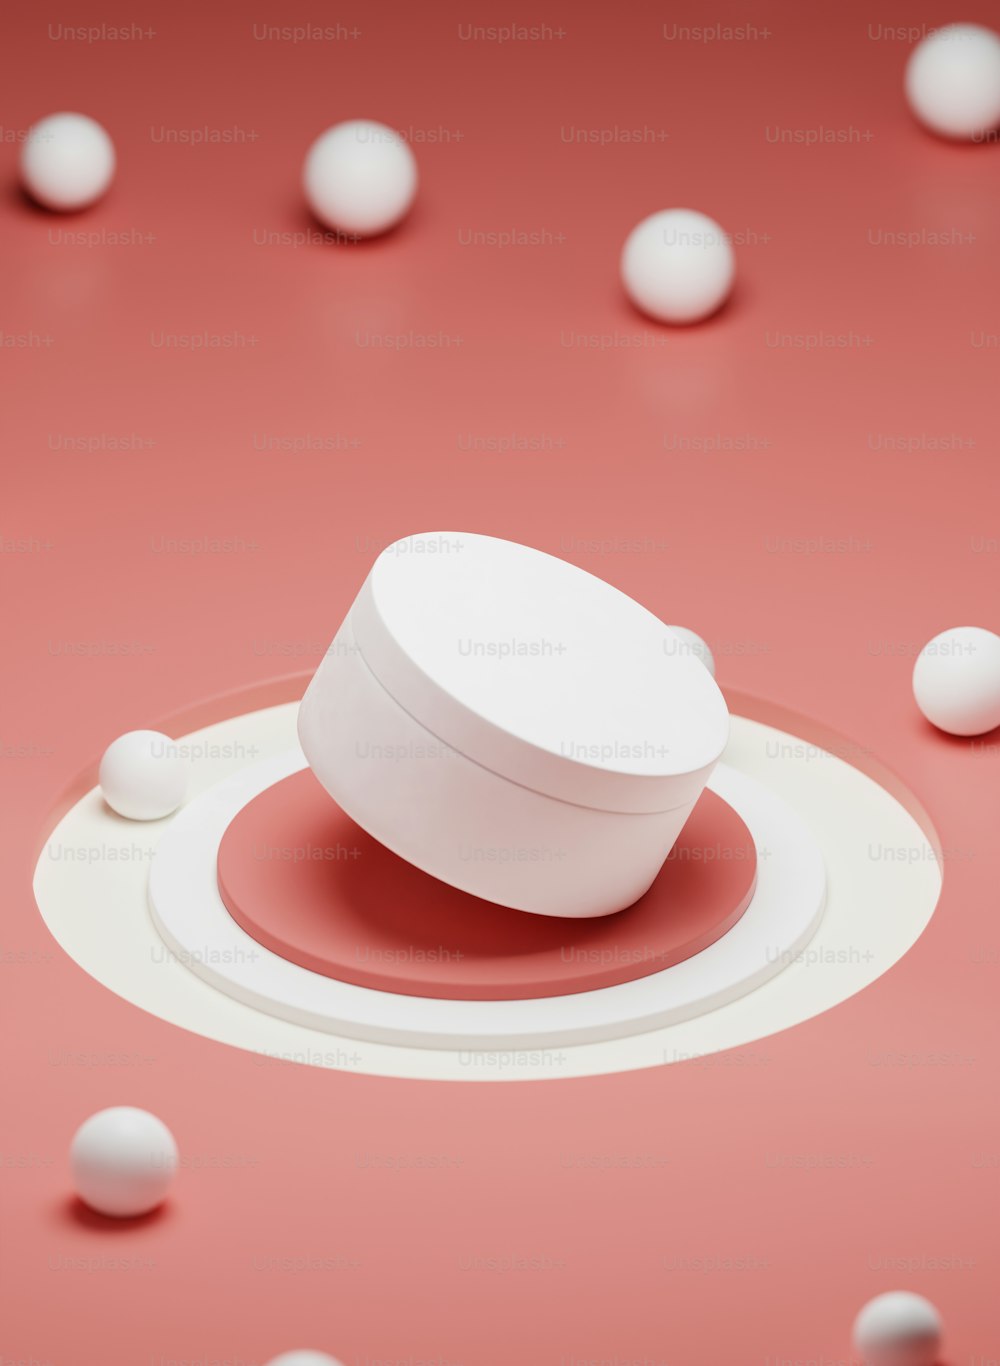 a white object sitting on top of a pink surface